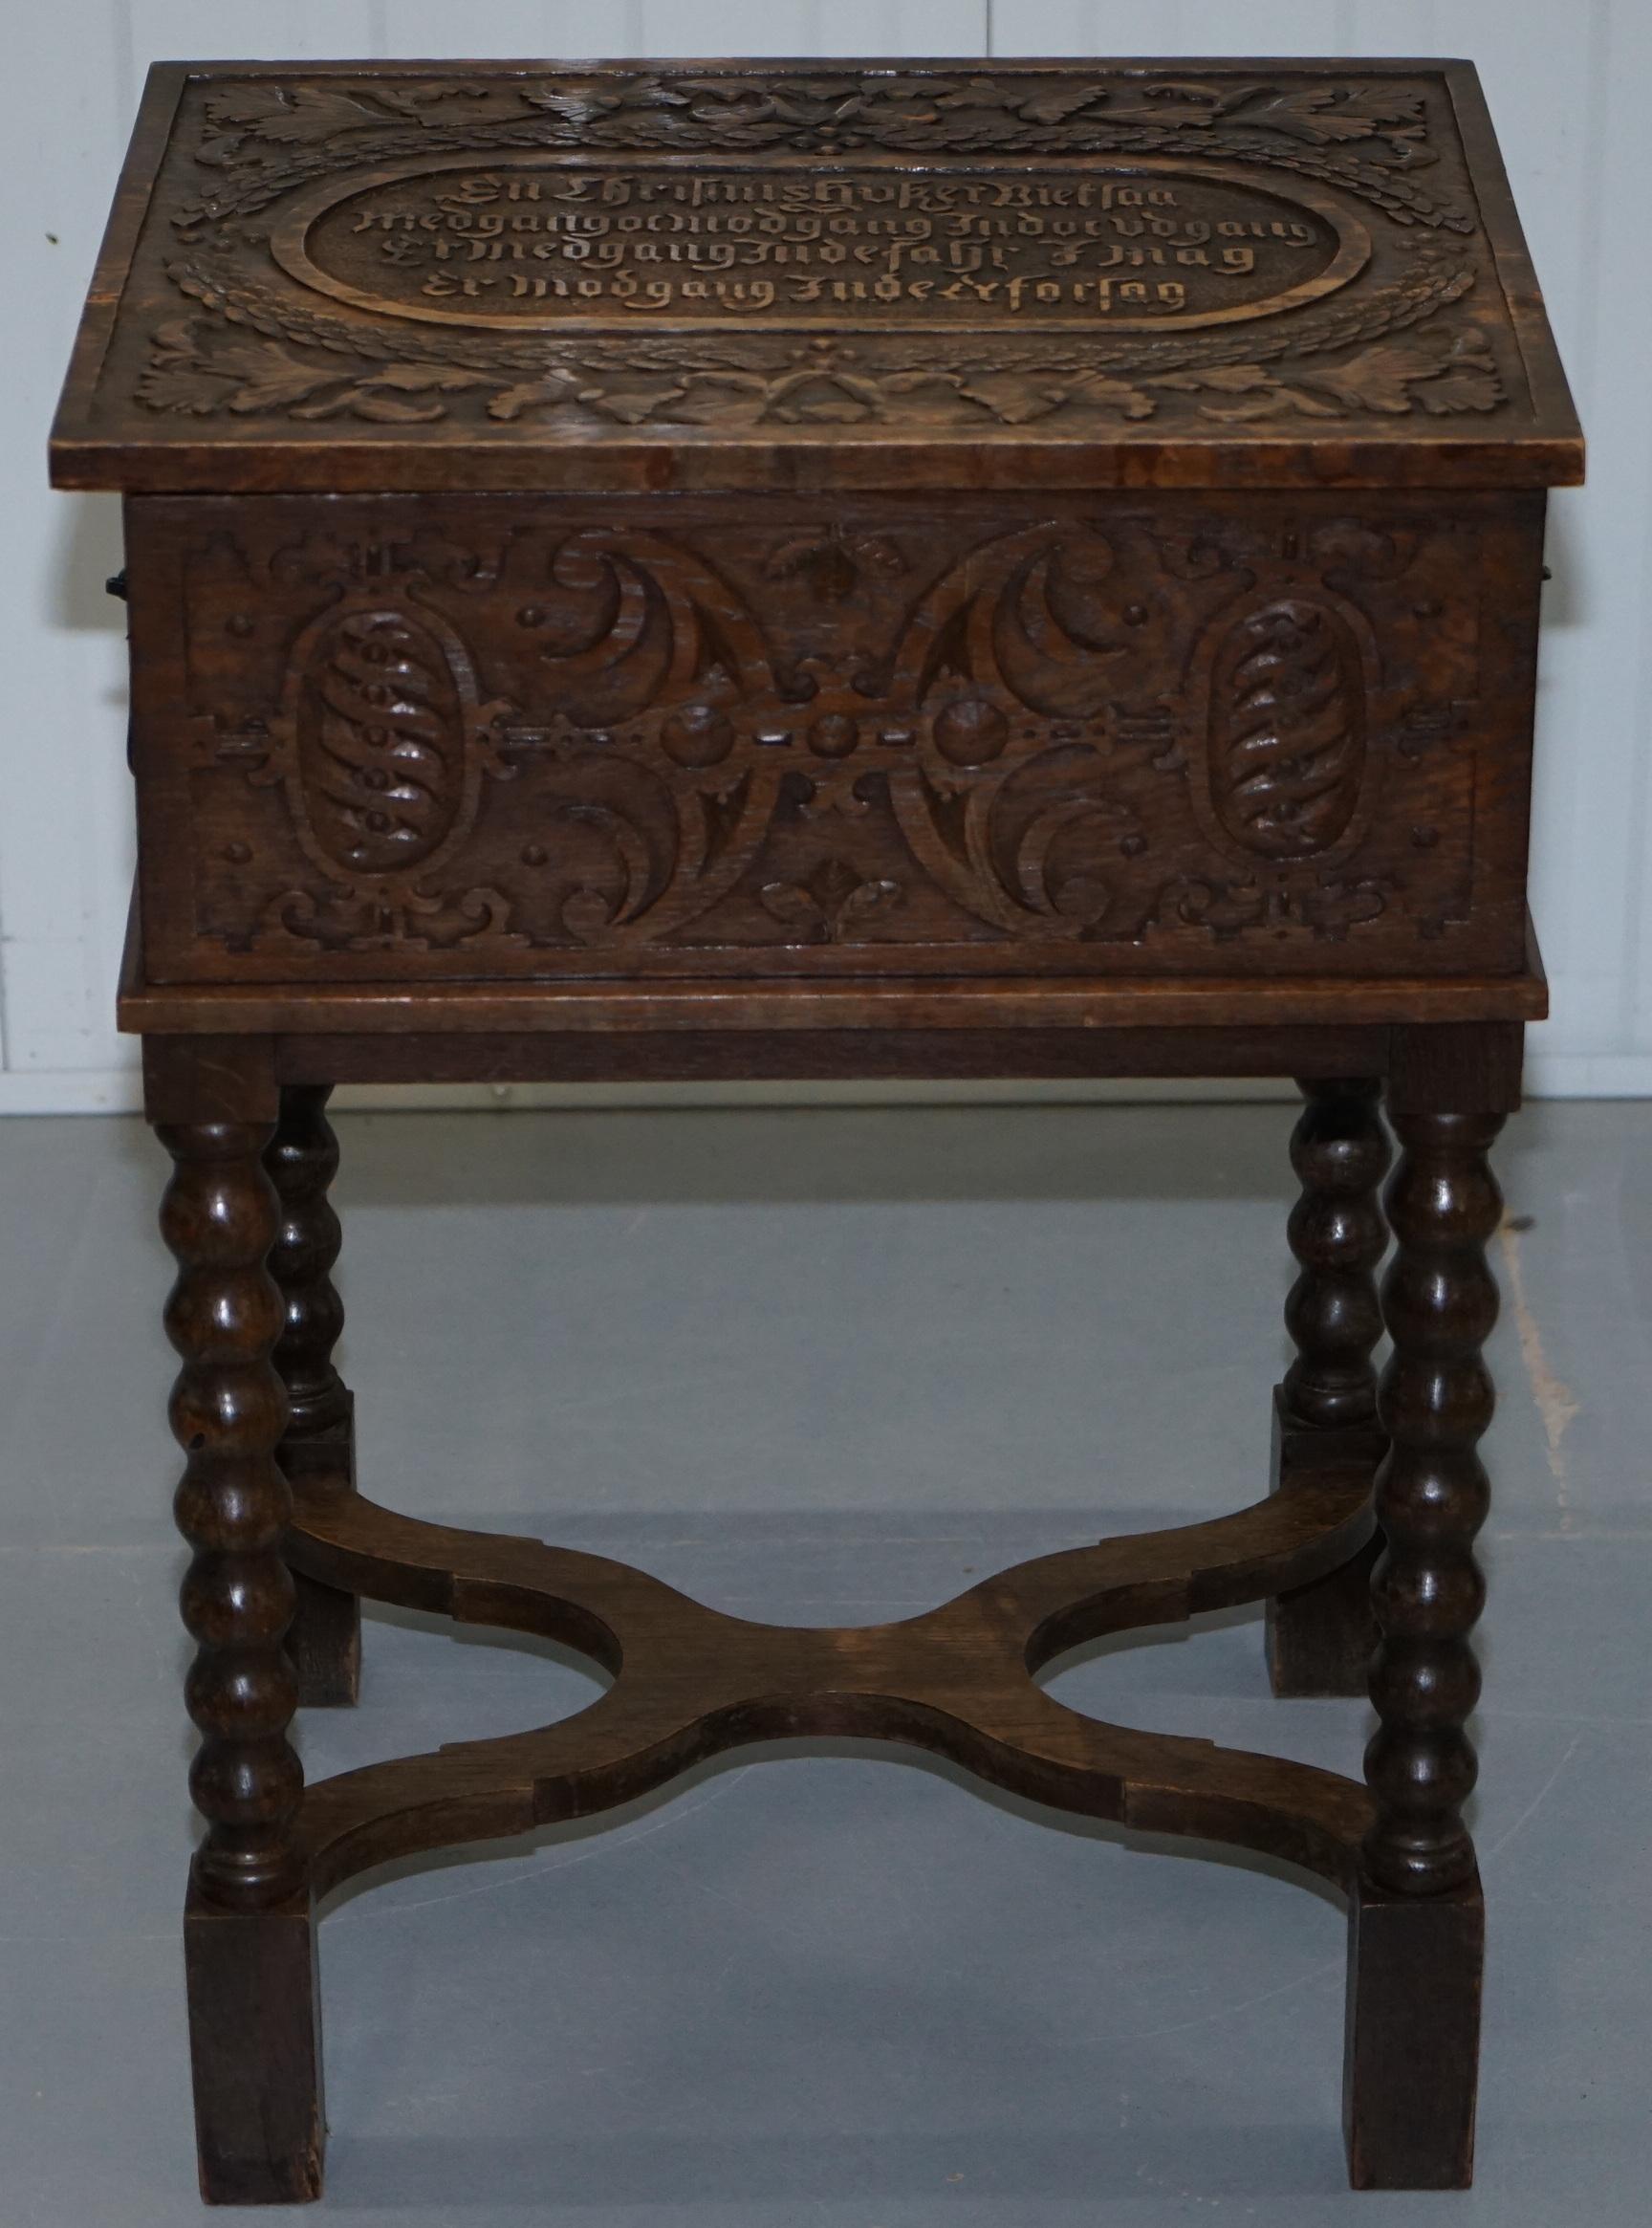 We are delighted to offer for sale lovely original hand carved from solid Oak Danish chest on stand, possibly a marriage chest

A good looking and well-made piece, the top is fully inscribed, I haven’t tried to translate it, I think its old Dutch